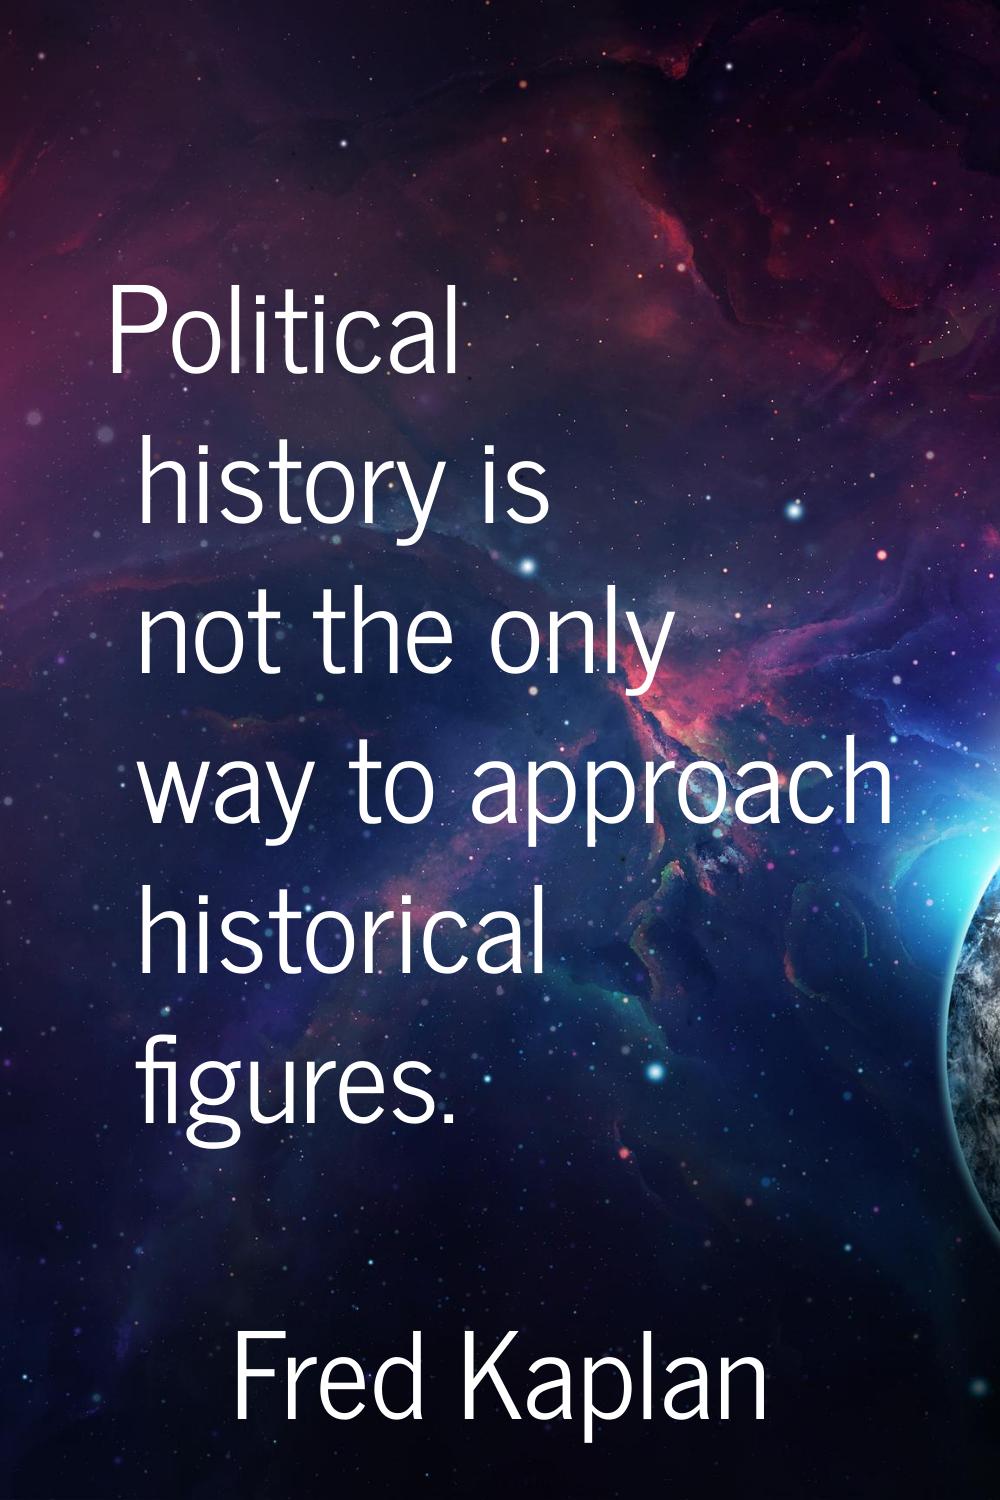 Political history is not the only way to approach historical figures.